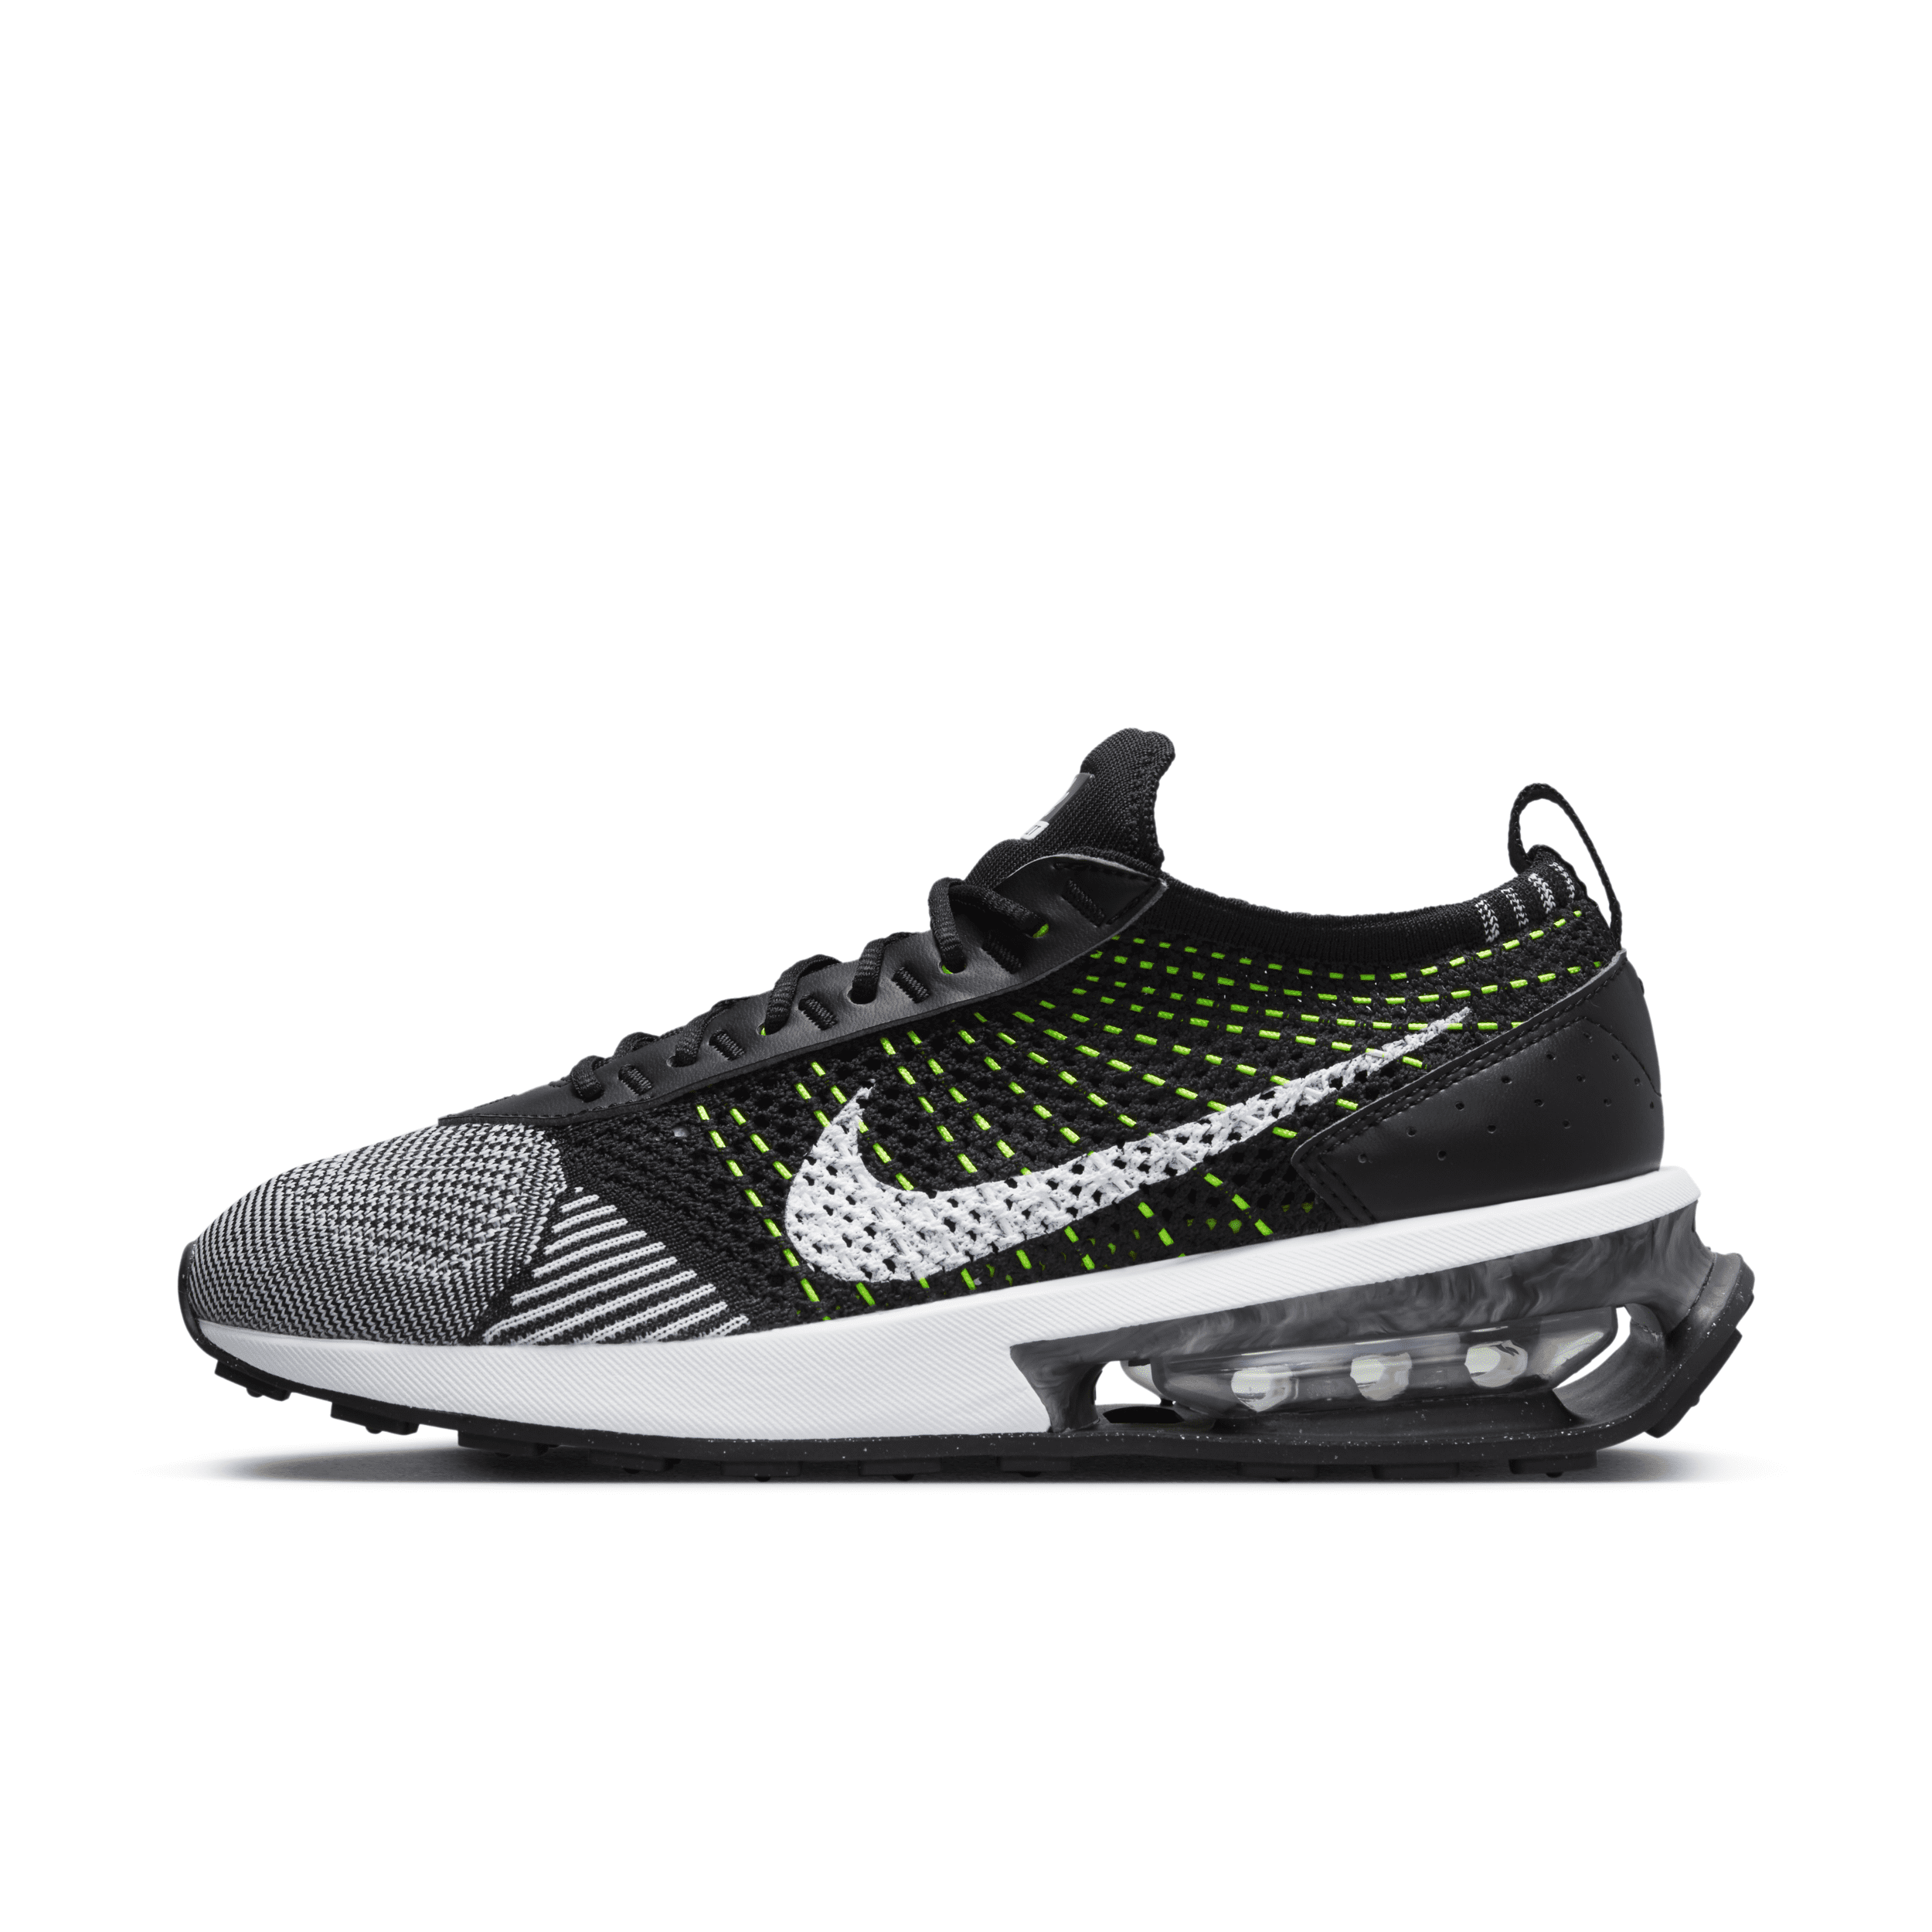 NIKE WOMEN'S AIR MAX FLYKNIT RACER SHOES,1001845297